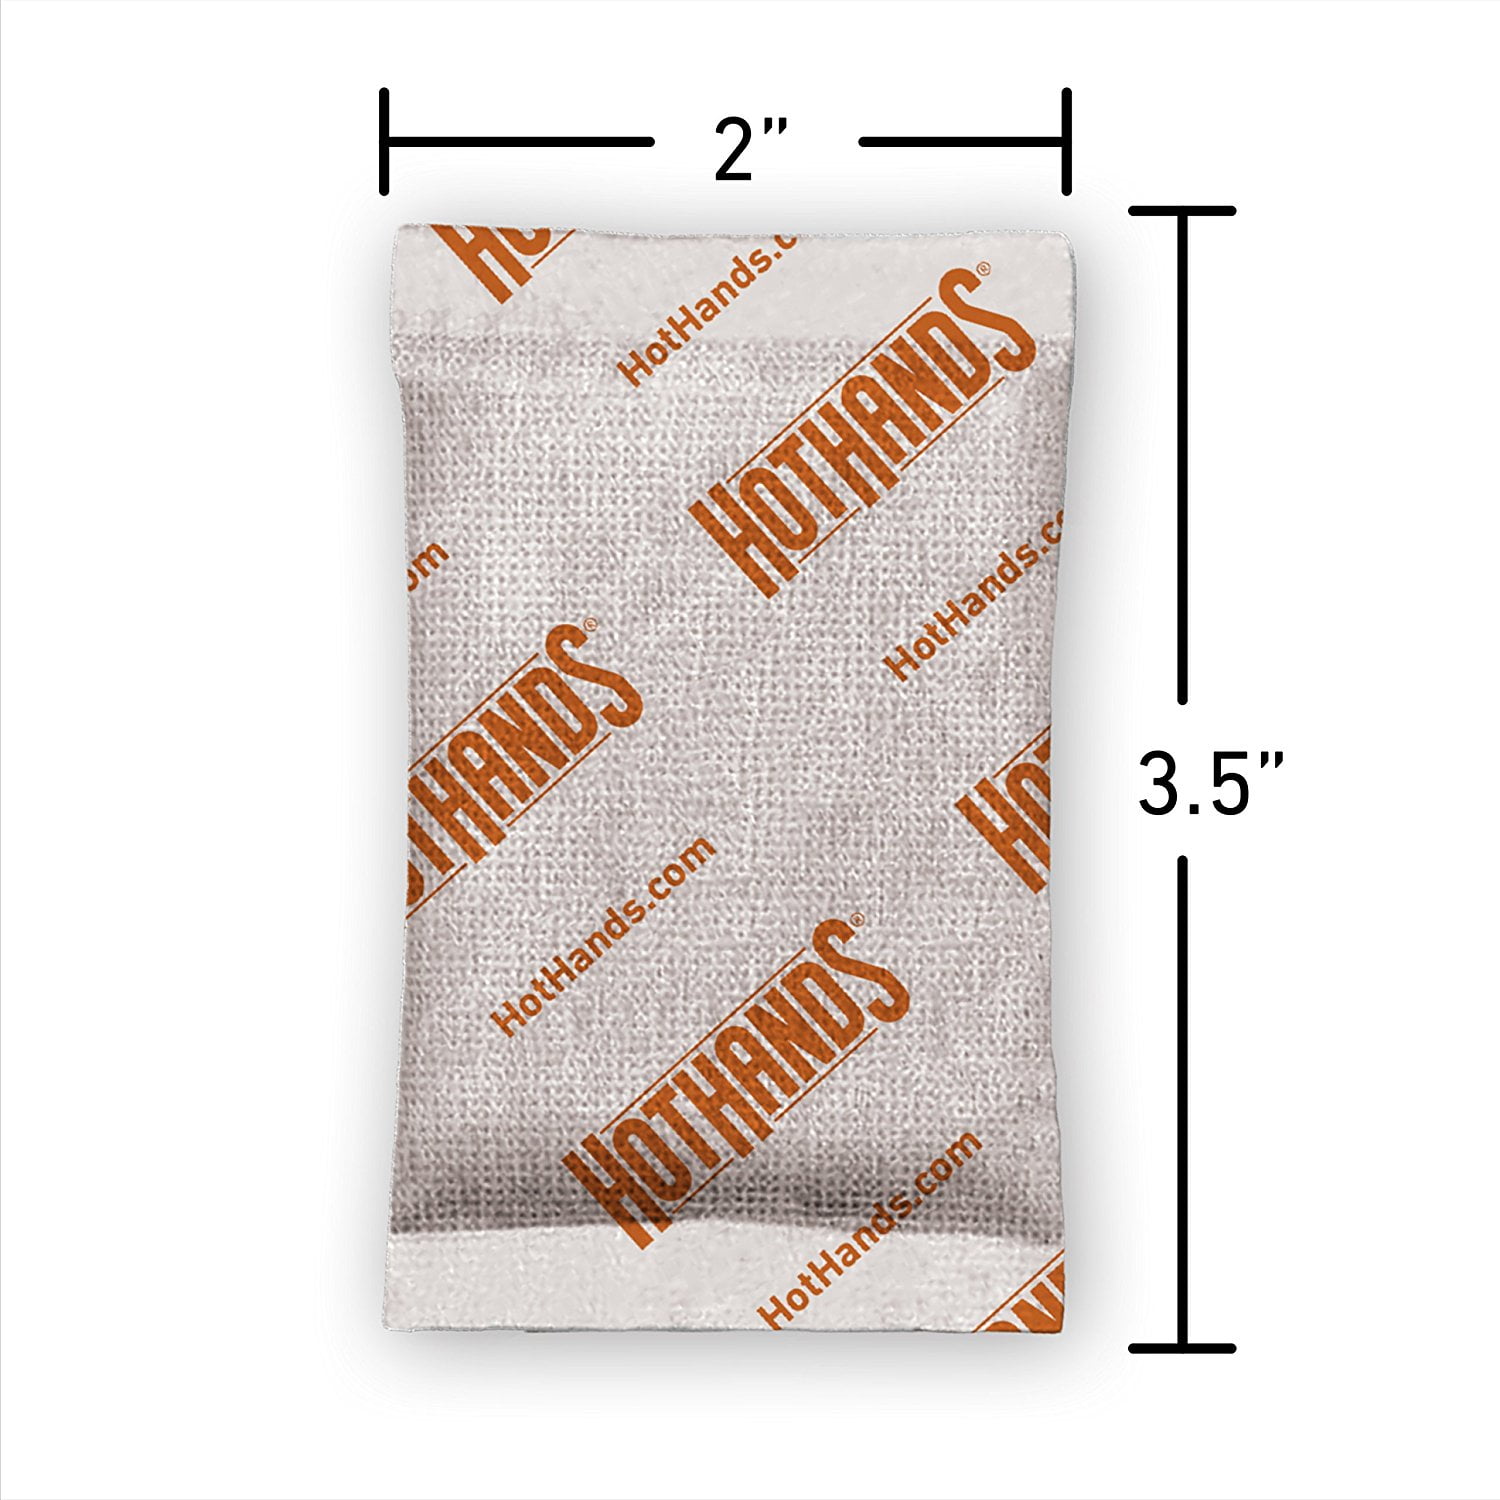 HOTHANDS - HAND WARMERS 6 PCS 3 - 10 HRS - BRAND NEW PACK 